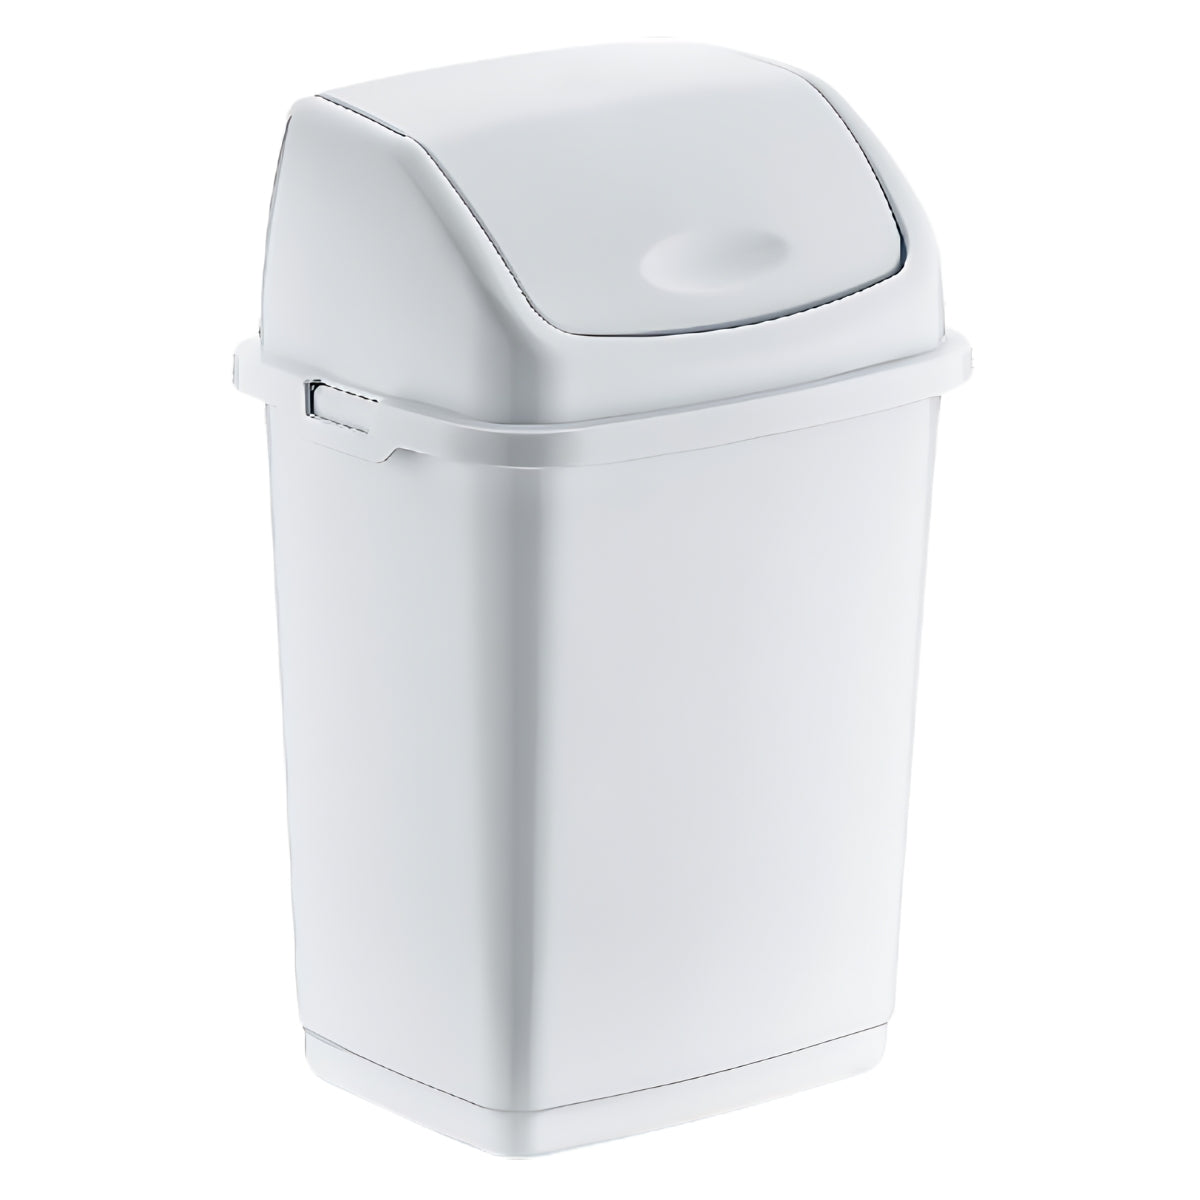 A Fantasy Swing Top Plastic Bin - 5L with a swinging lid, isolated on a white background.